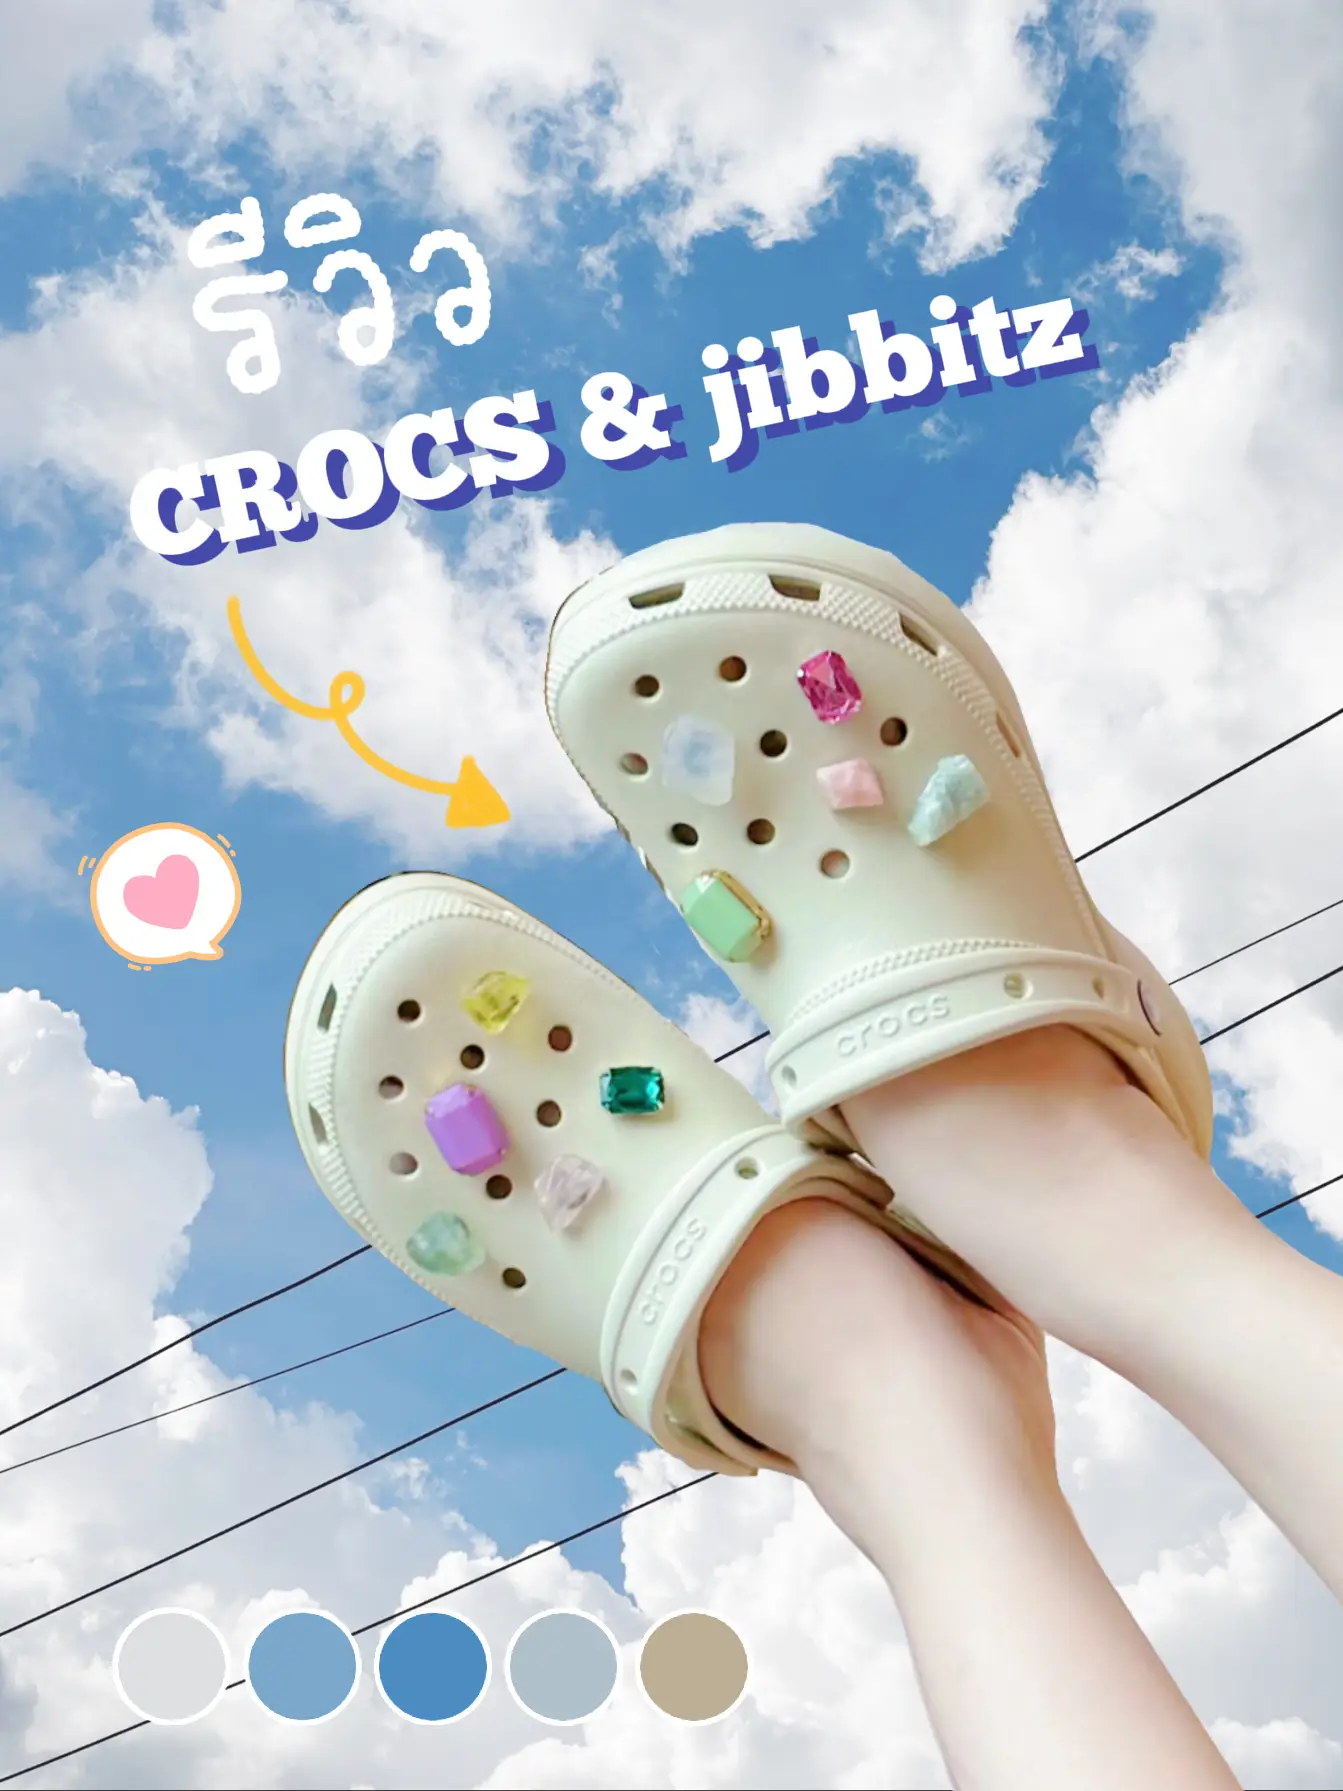 Crocs platform & jibbitz are wholeheartedly cute. ❤️, Gallery posted by  TONG